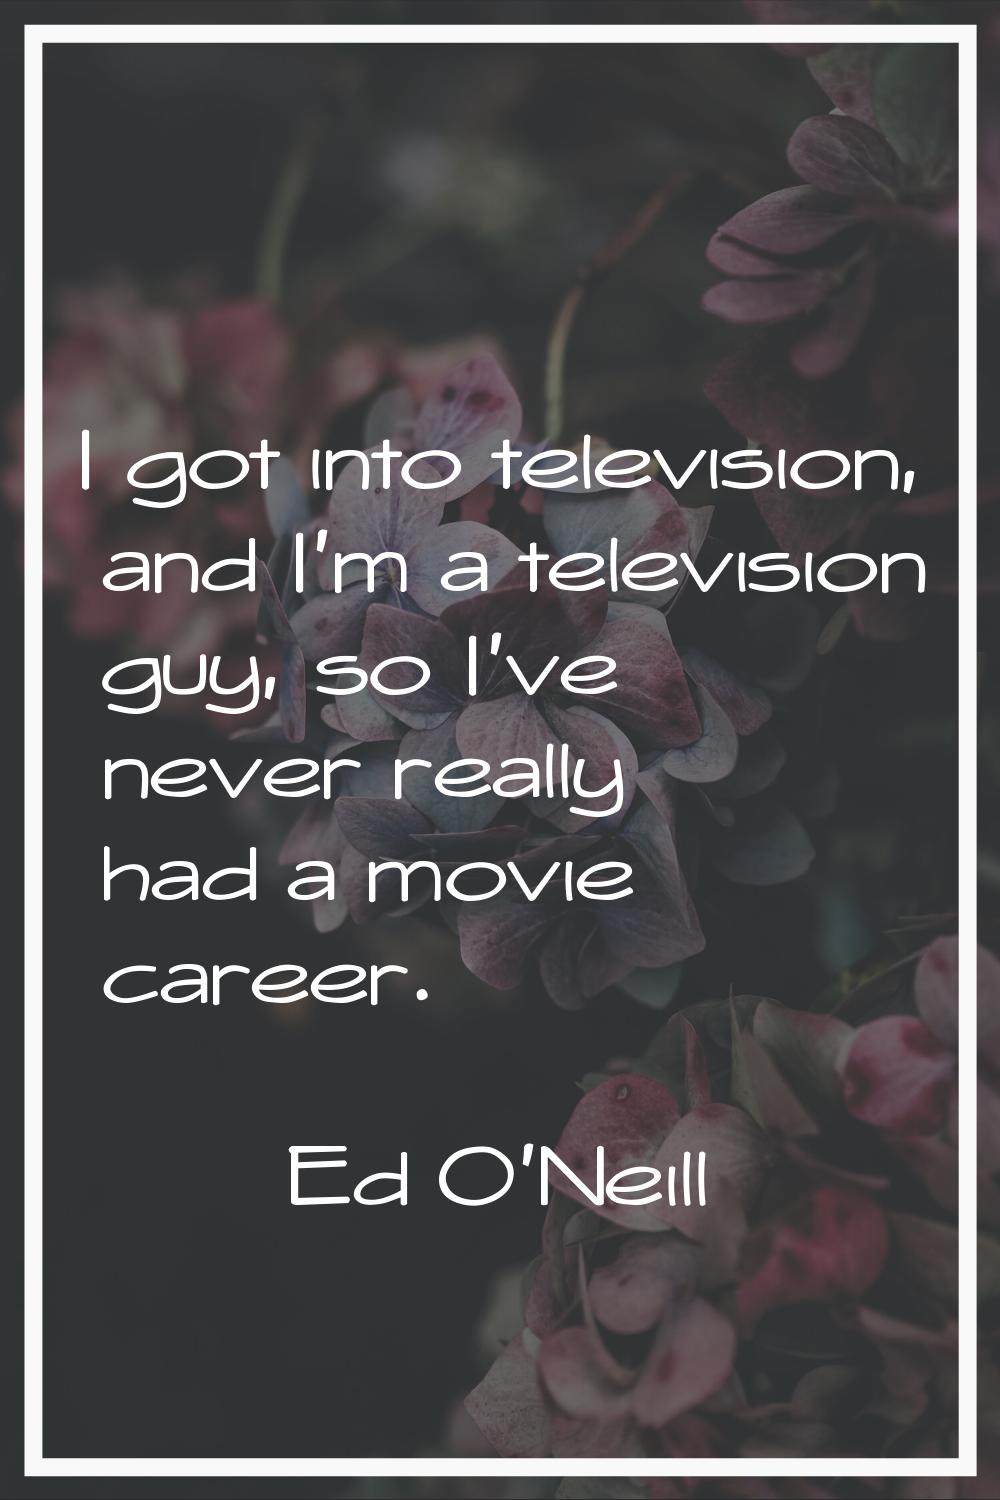 I got into television, and I'm a television guy, so I've never really had a movie career.